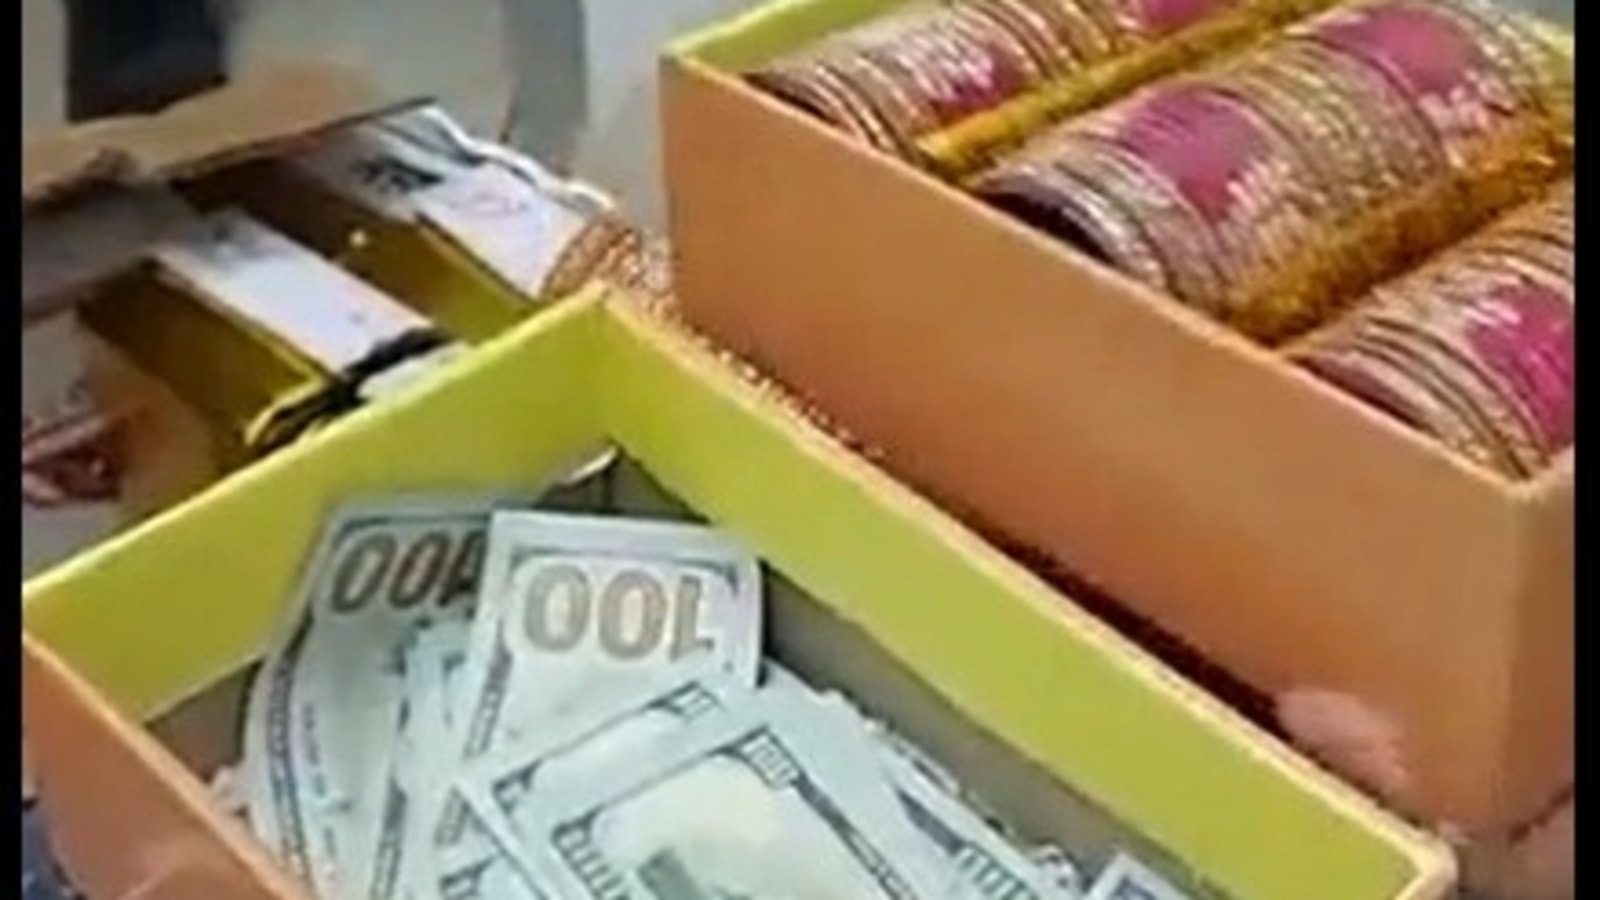 Cxxxxxvideo - In Delhi, 27.5 lakh in dollars, euros found in bangle boxes, seized | Video  | Latest News Delhi - Hindustan Times